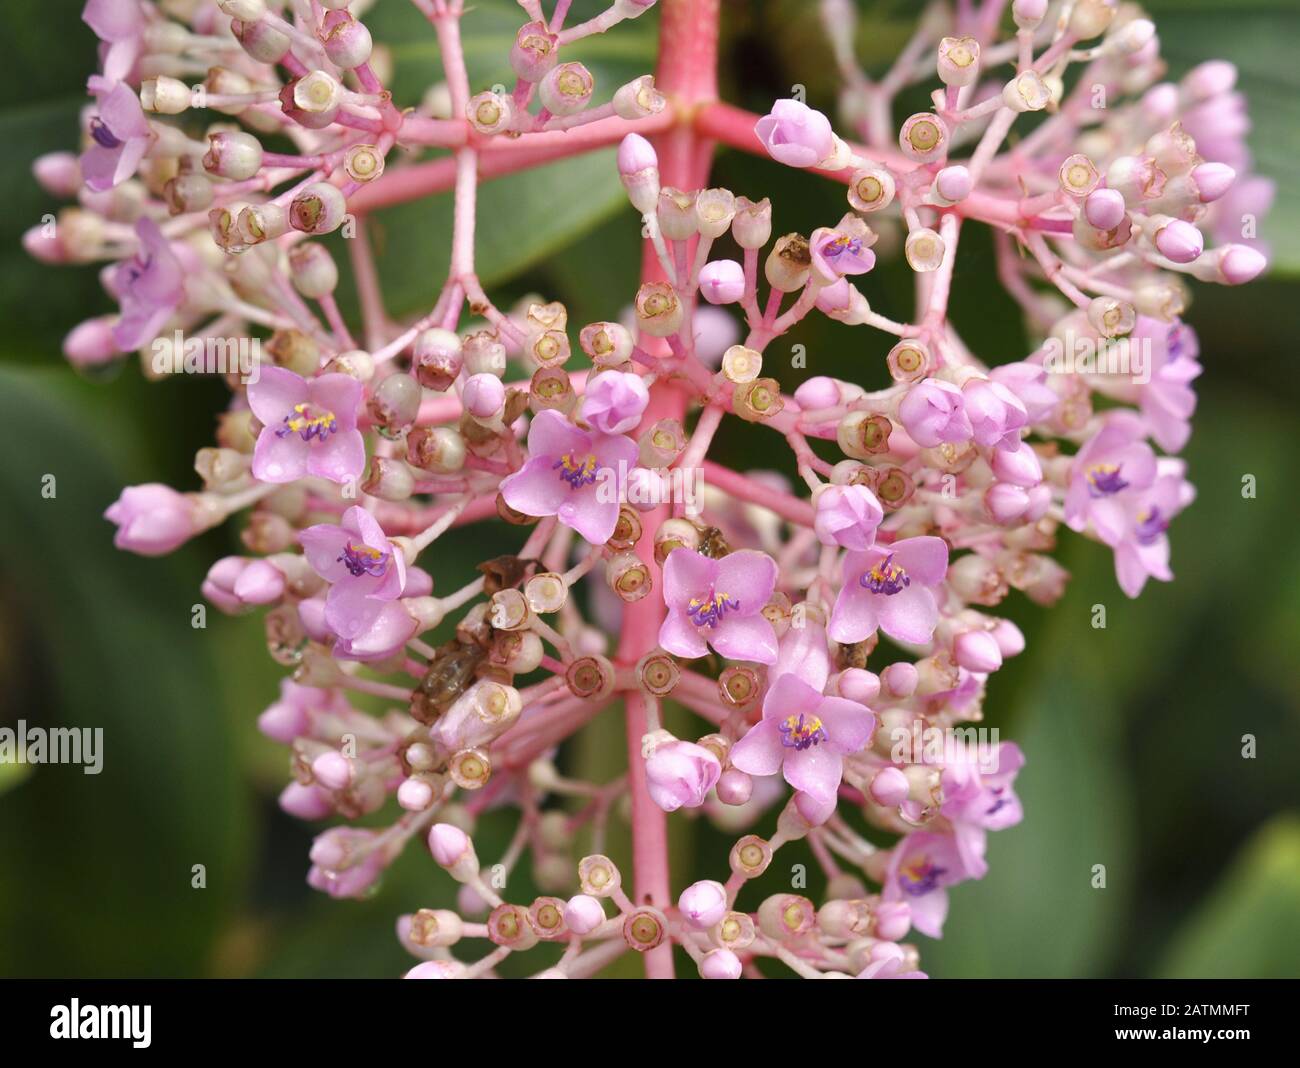 The pink waxy flowers of a Medinilla magnifica plant Stock Photo